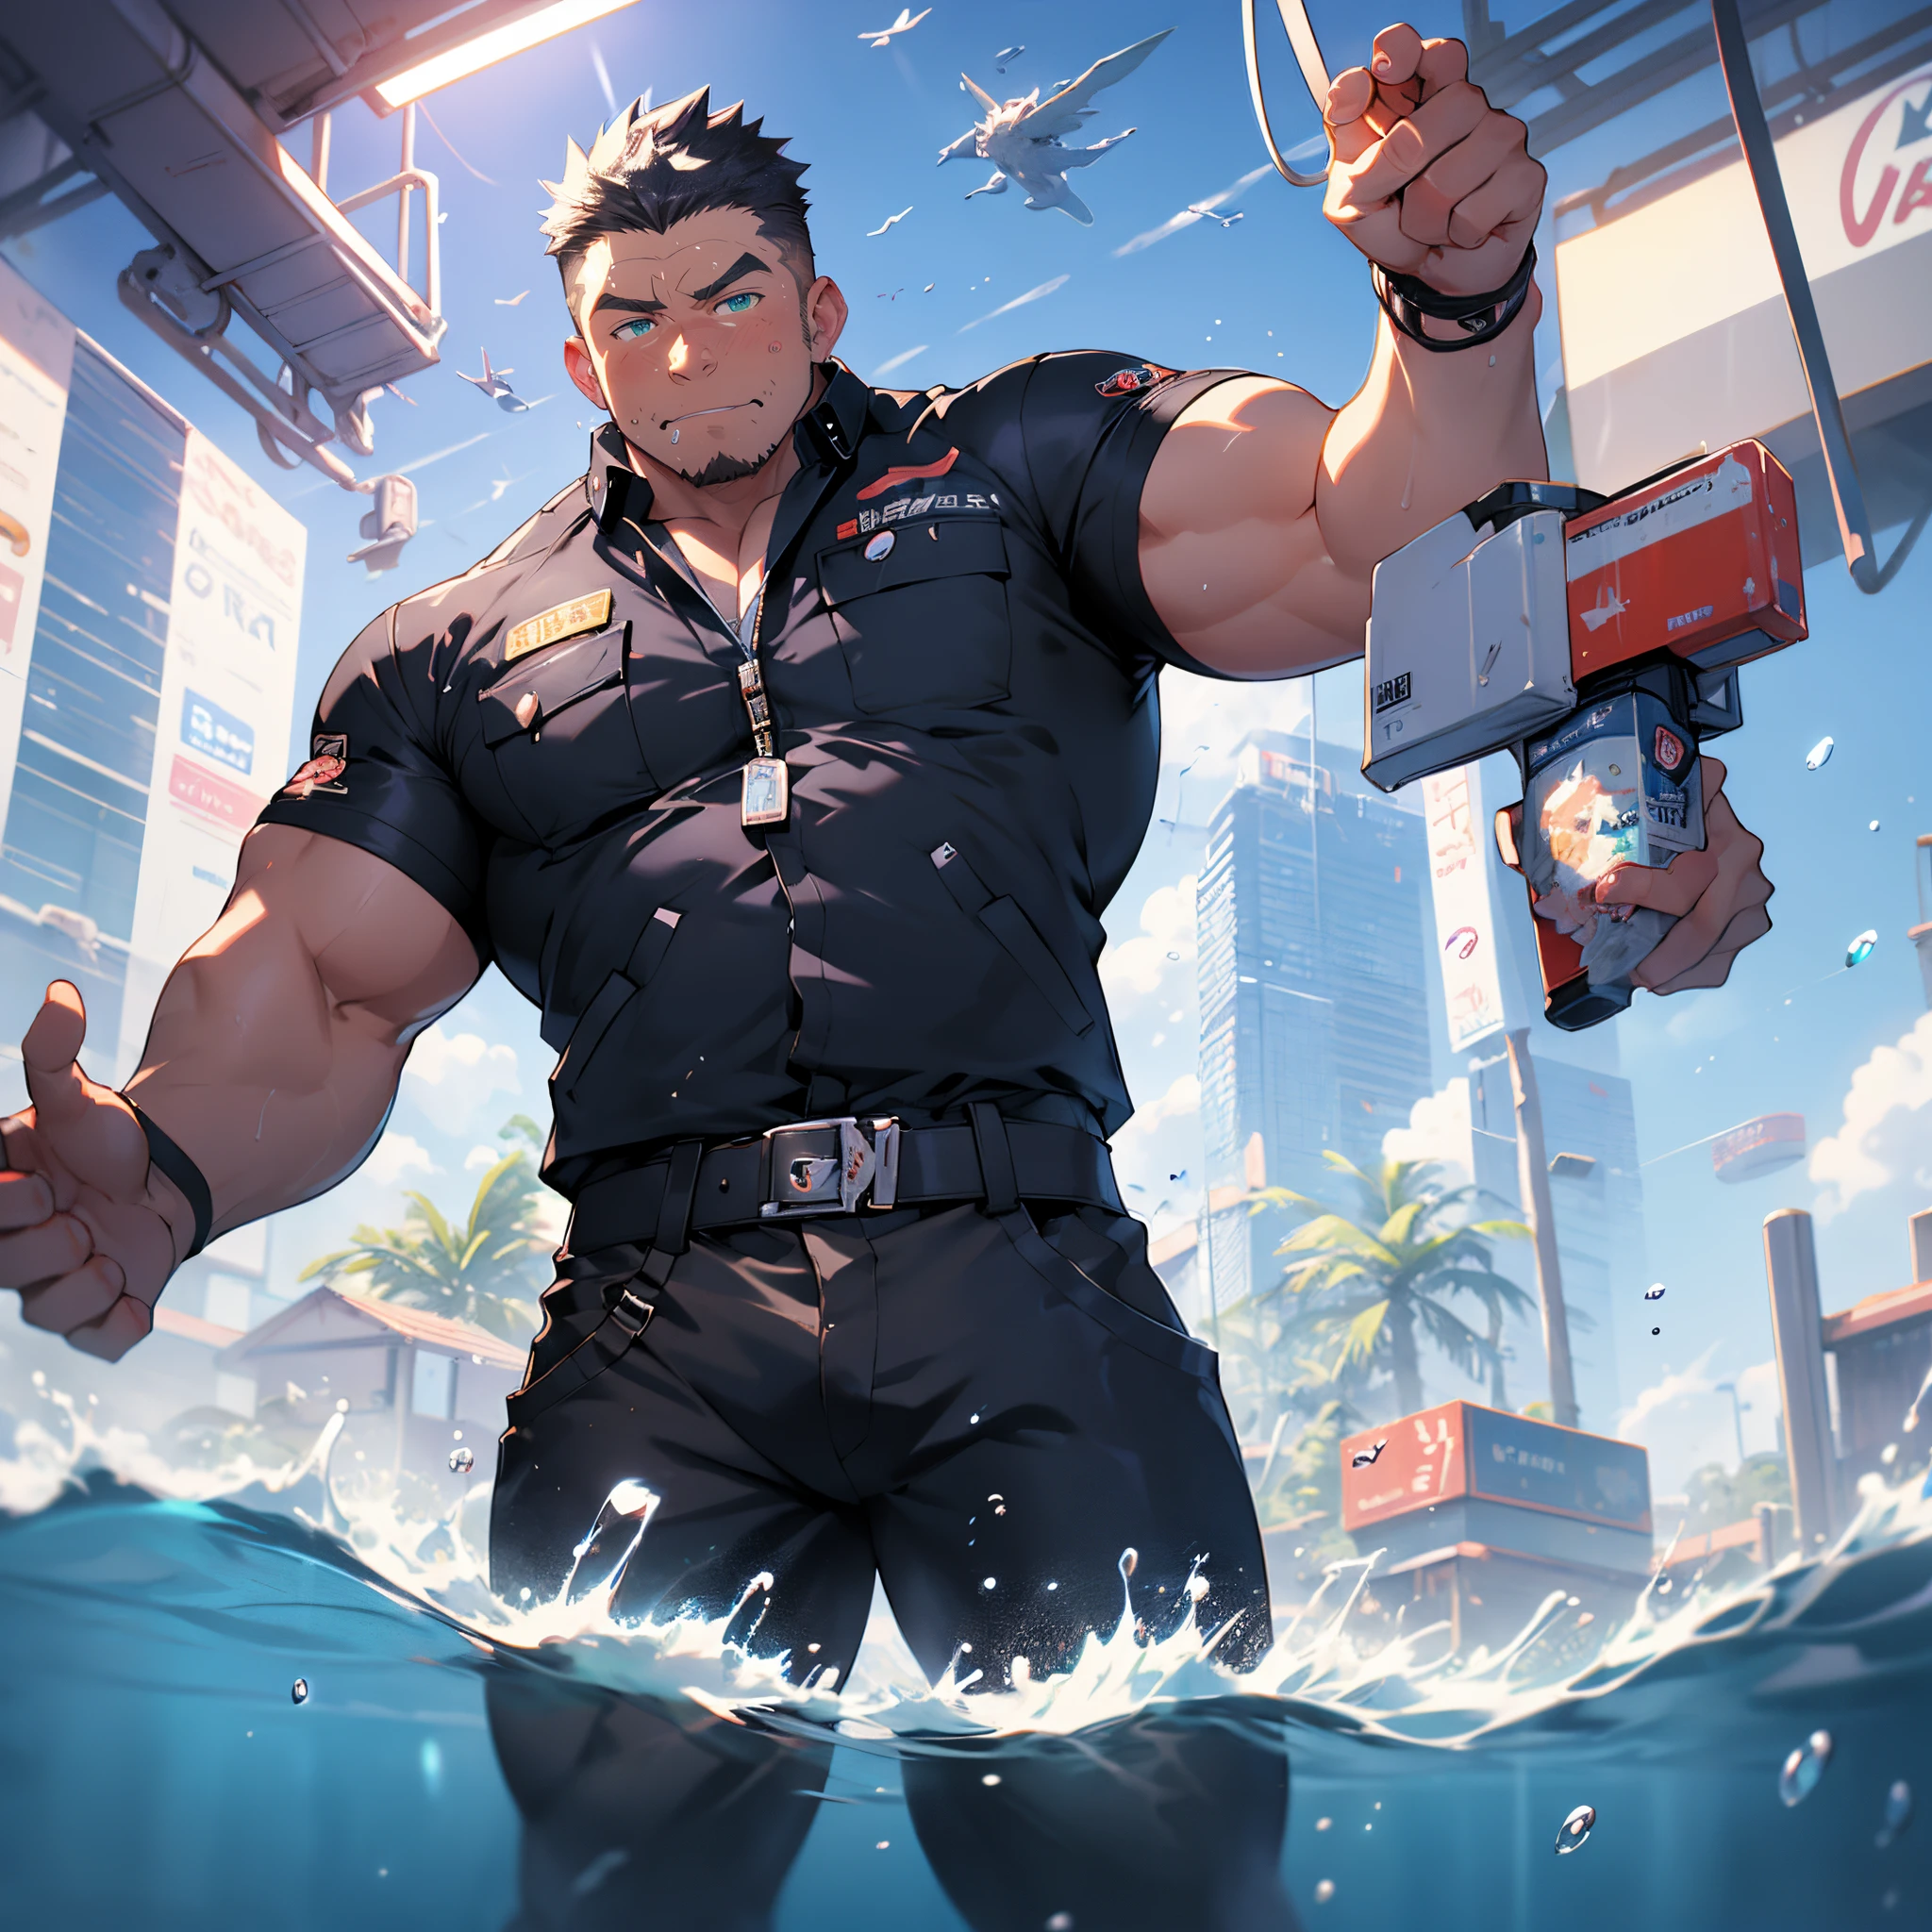 under water skyscraper neon lights effects, super high resolution, undercut, faux hawk, manly kawaii moe babyface, mechanic engineer jacket on shirtless muscular creamy body, meaty thigh, skyrocketing the crotch, magical sci-fi arms weapons, gripping water blade, floating water ball magically, trending on pixiv, kawaii moe anime